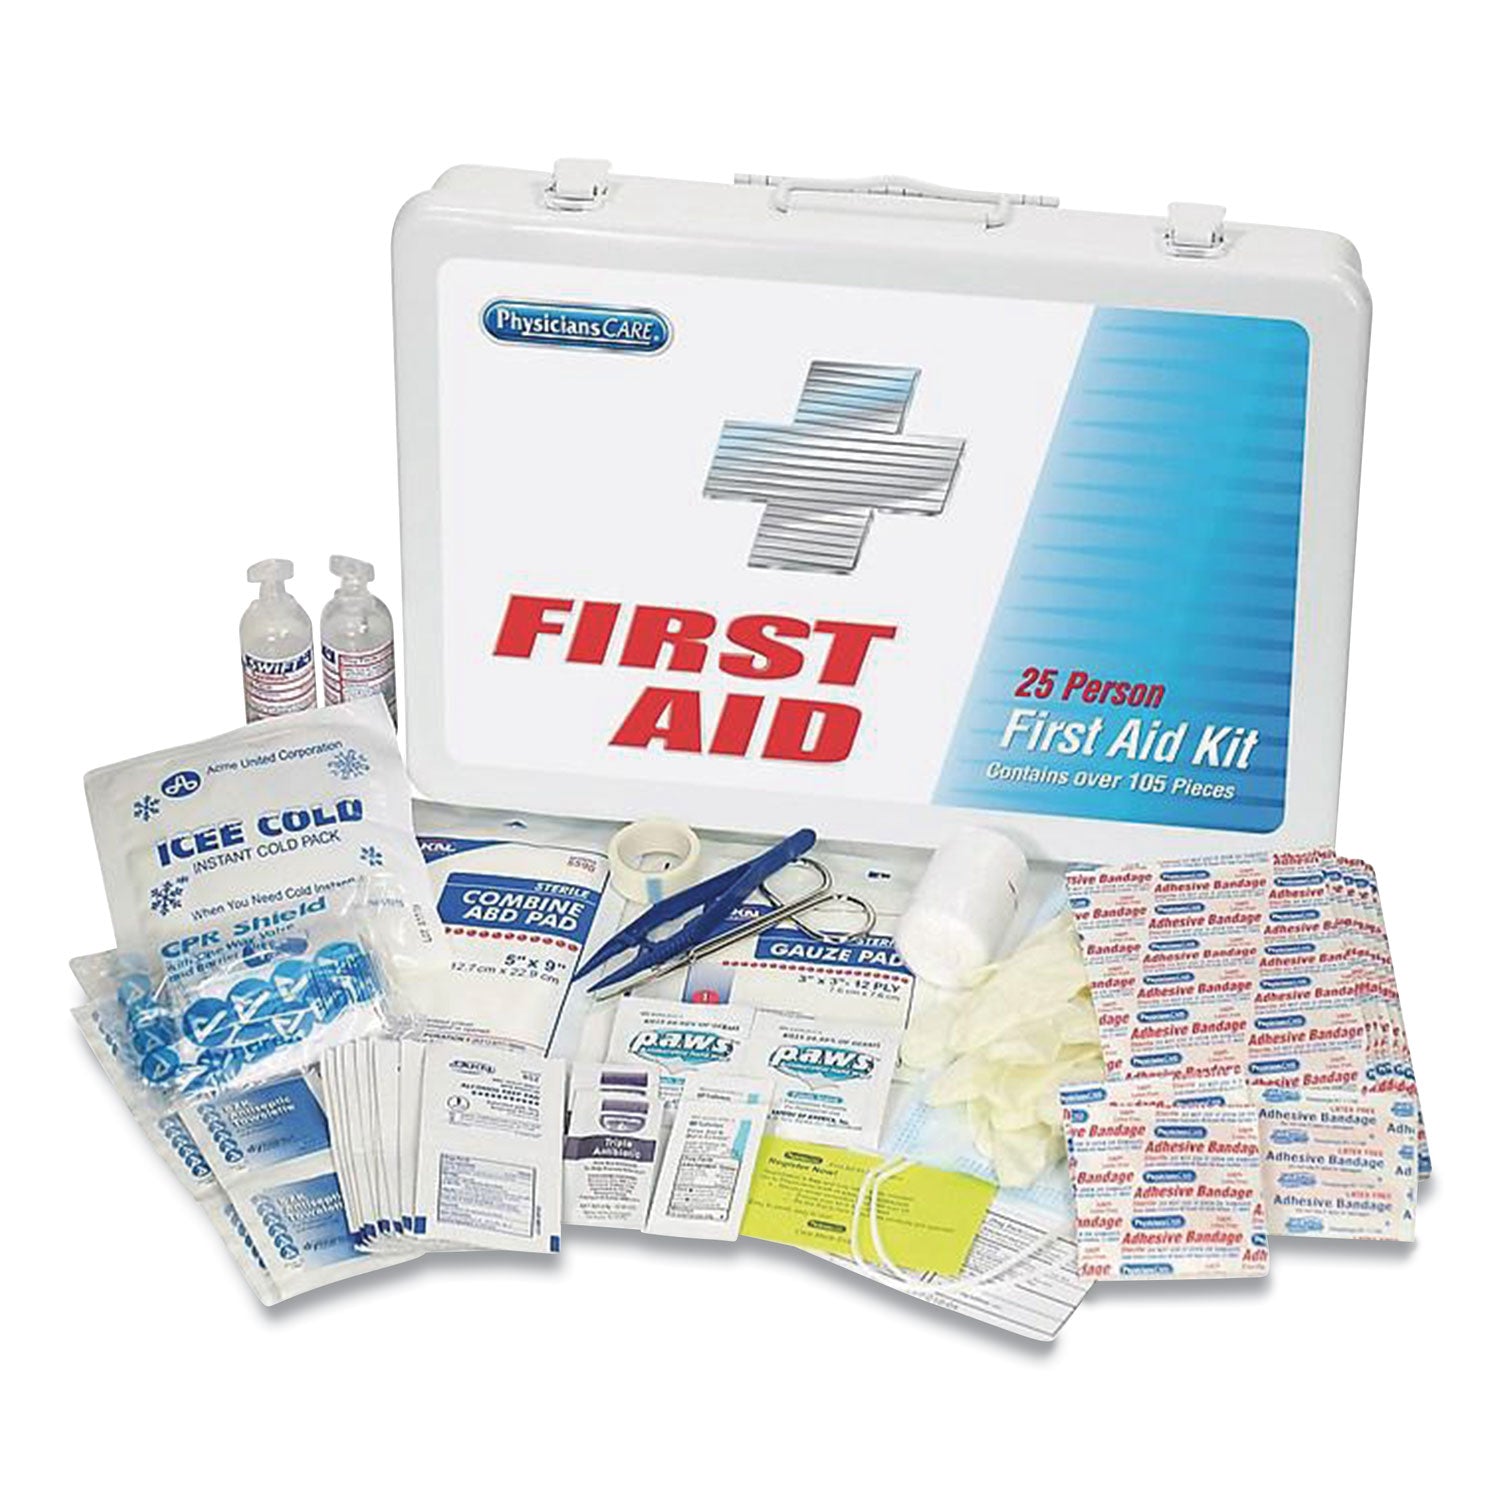 first-aid-kit-for-up-to-25-people-125-pieces-metal-case_phy90175001 - 1